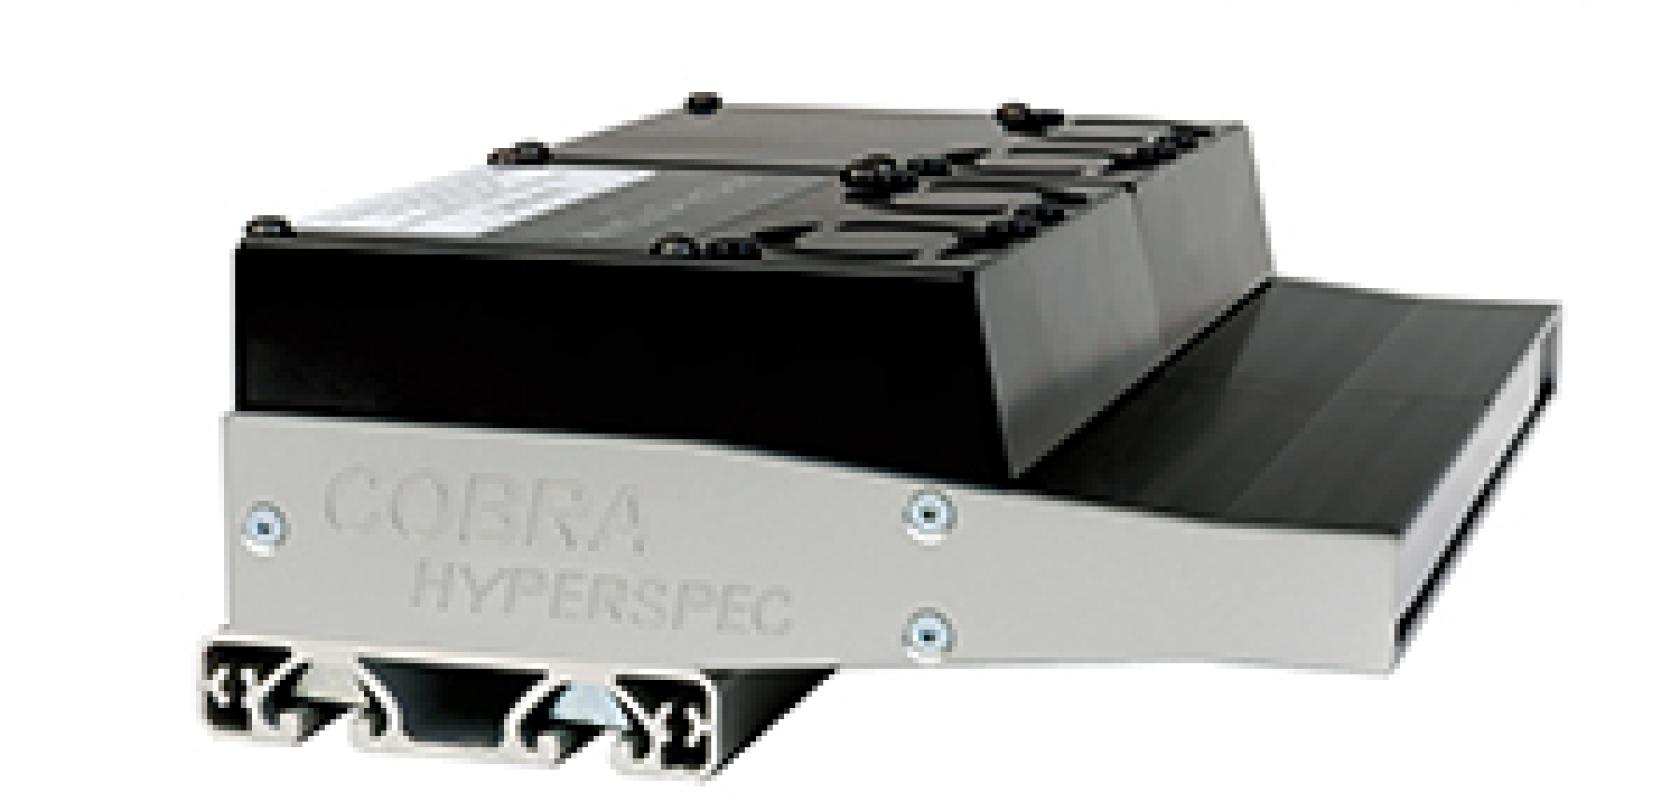 The COBRA HyperSpec from ProPhotonix